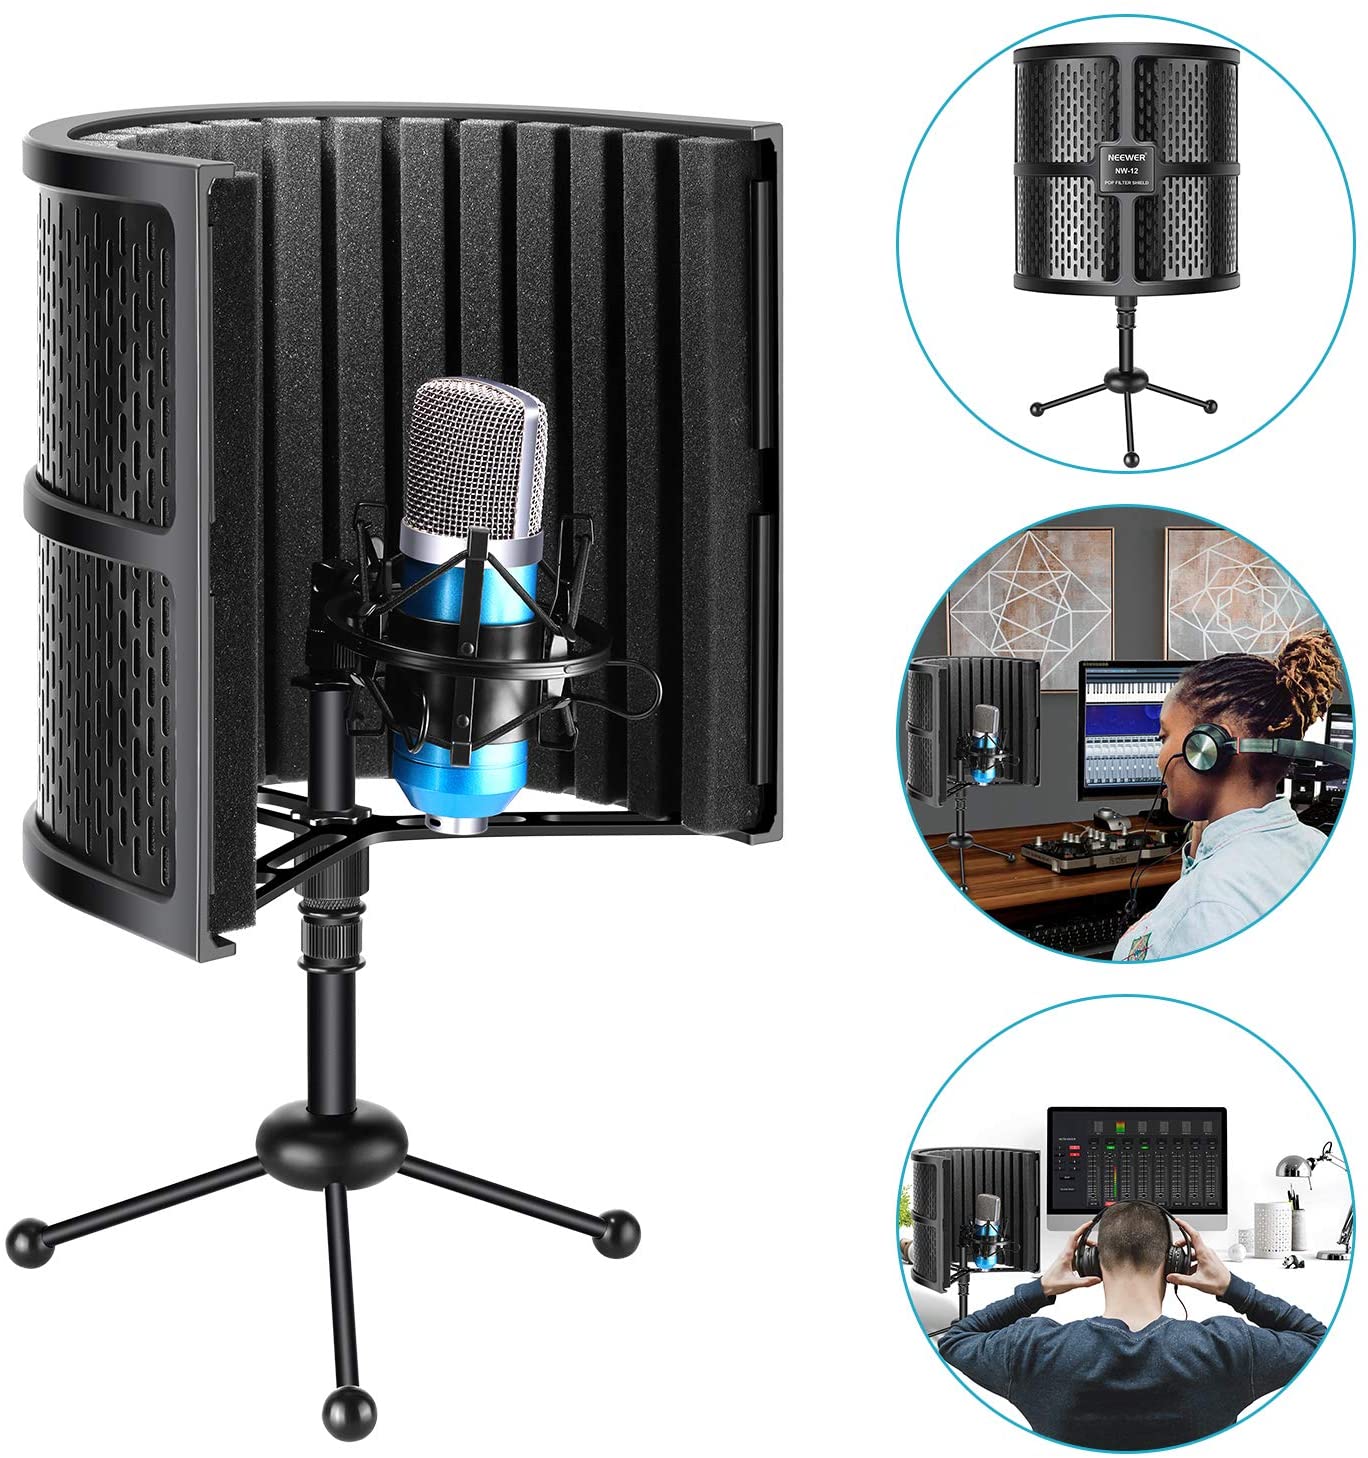 7 Best Microphone Isolation Shields Reviewed in Detail [Jul. 2022]